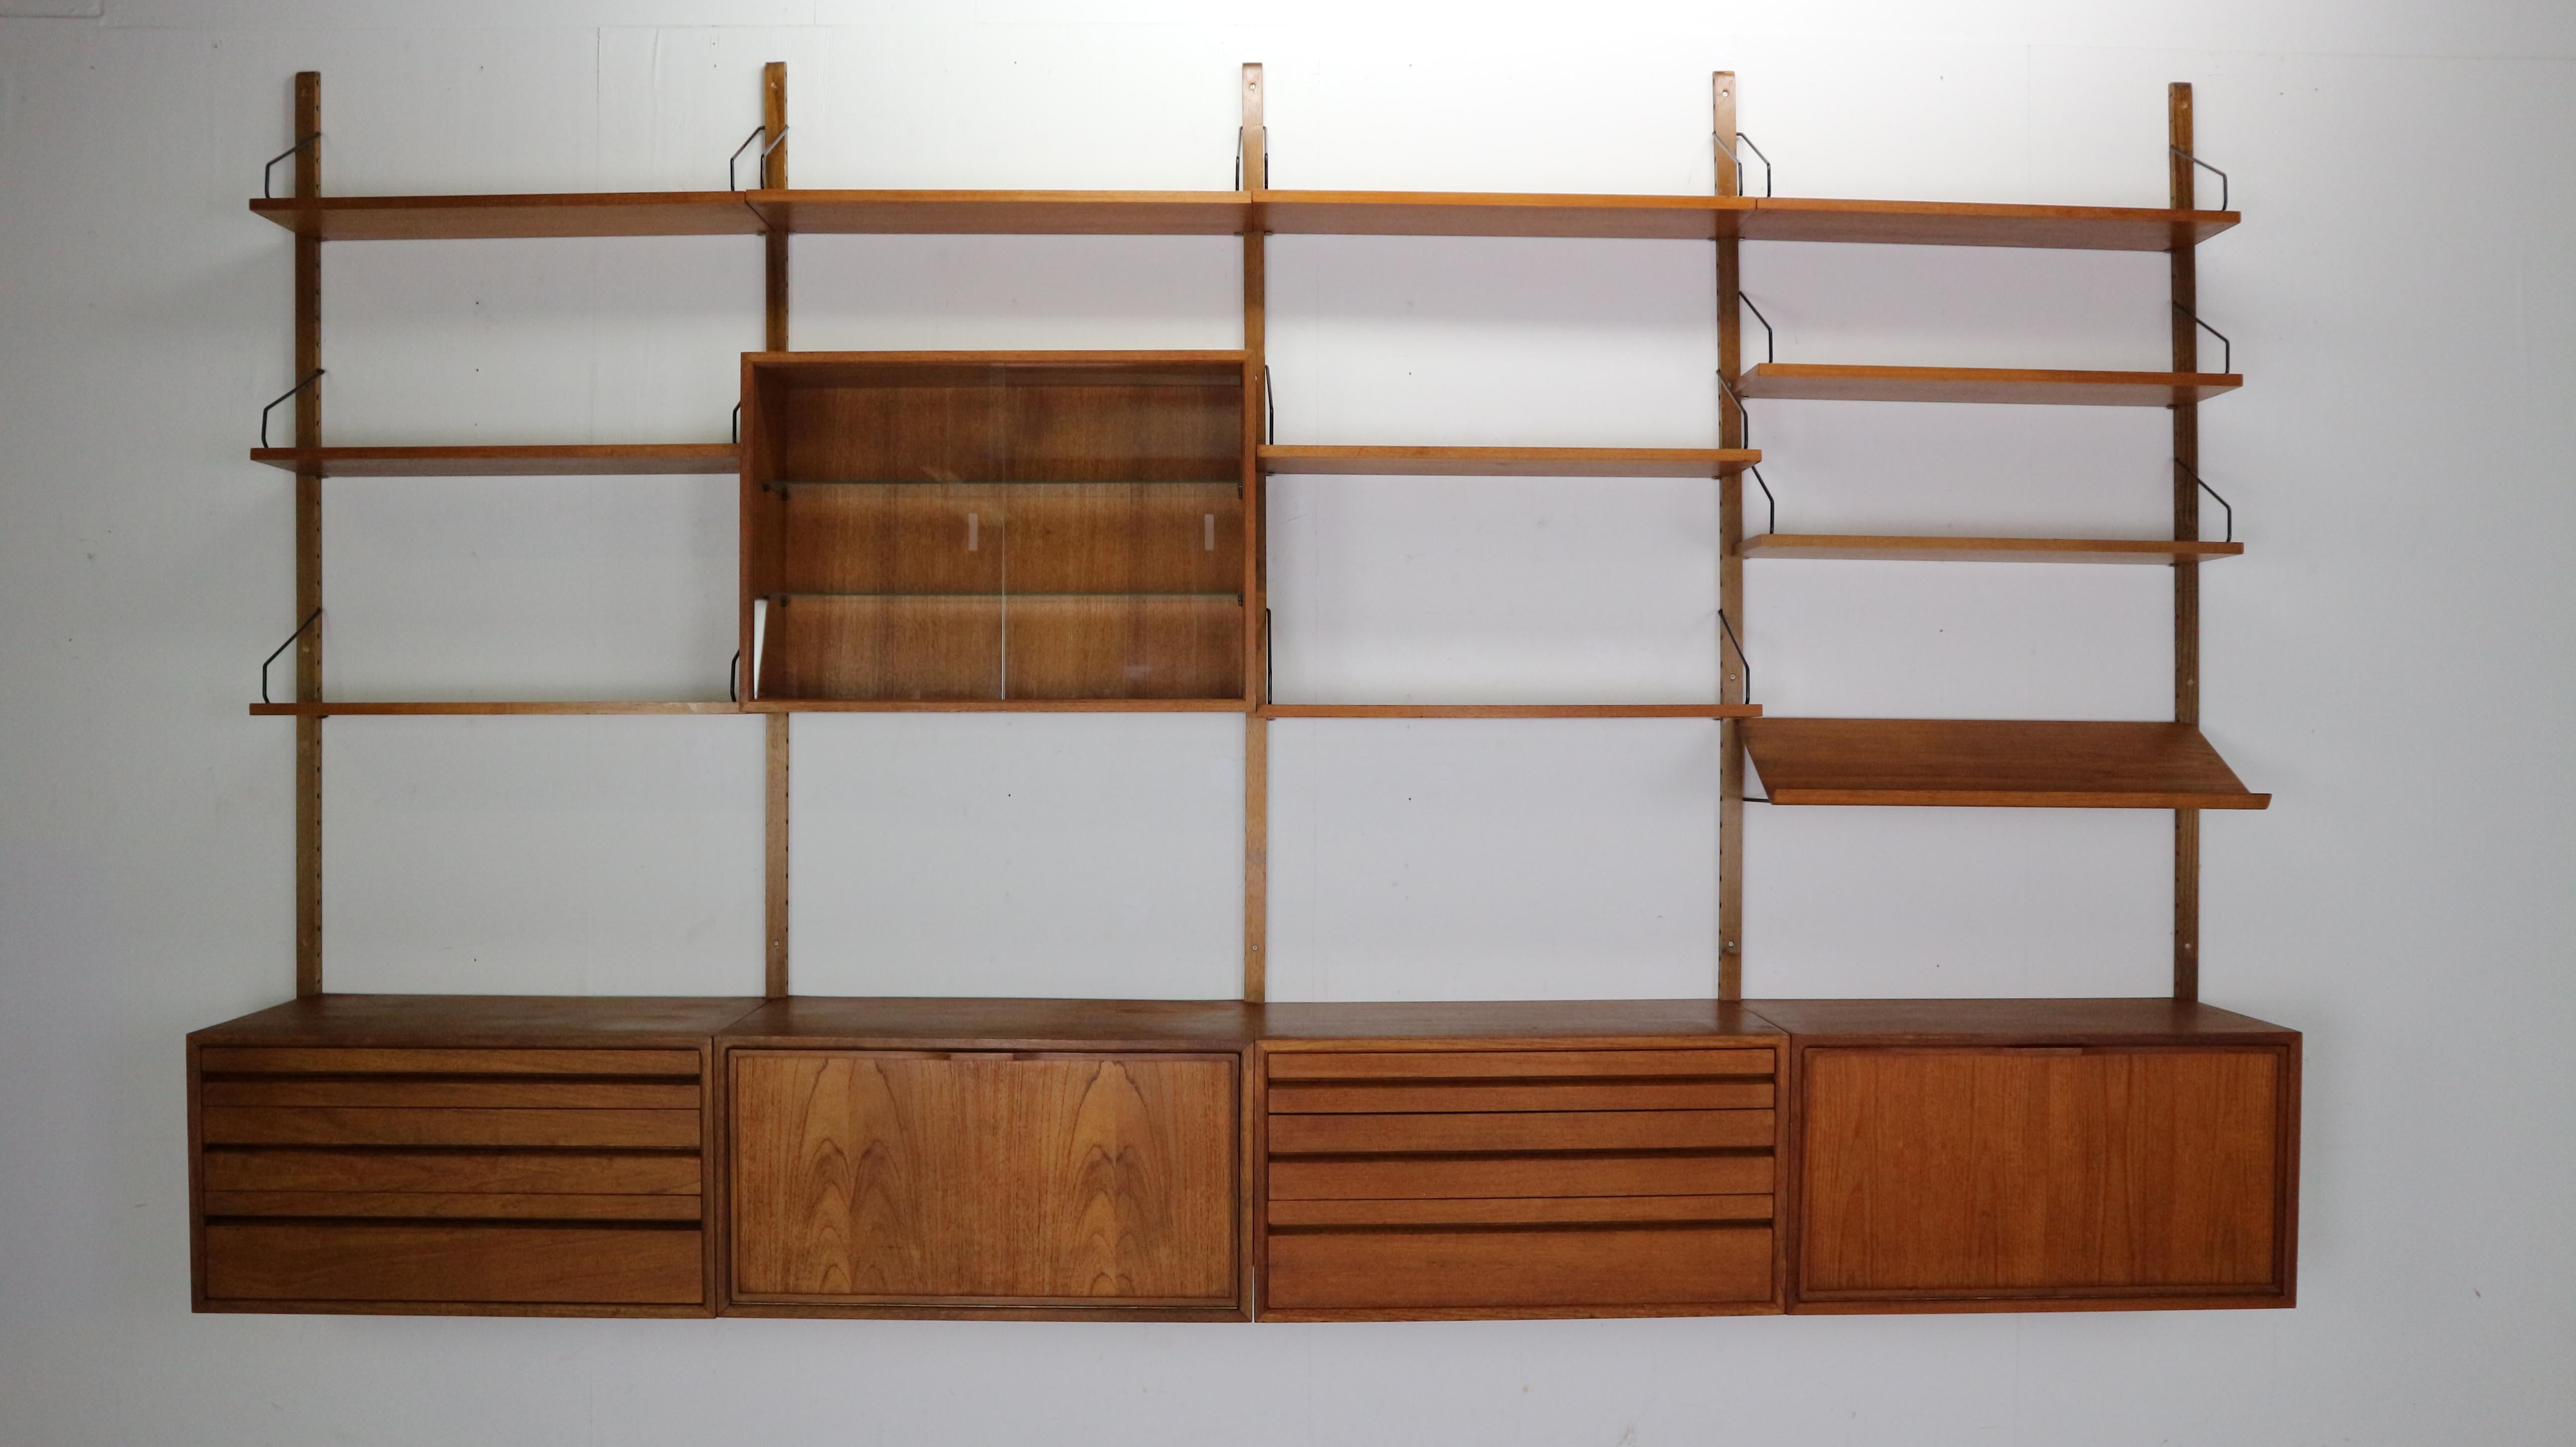 Extra large Danish design wall system or shelving unit by Poul Cadovius for Royal System, designed in Denmark in 1950s.

When you ask someone to think of an European midcentury wall unit, most will probably think of Poul Cadovius and his shelving